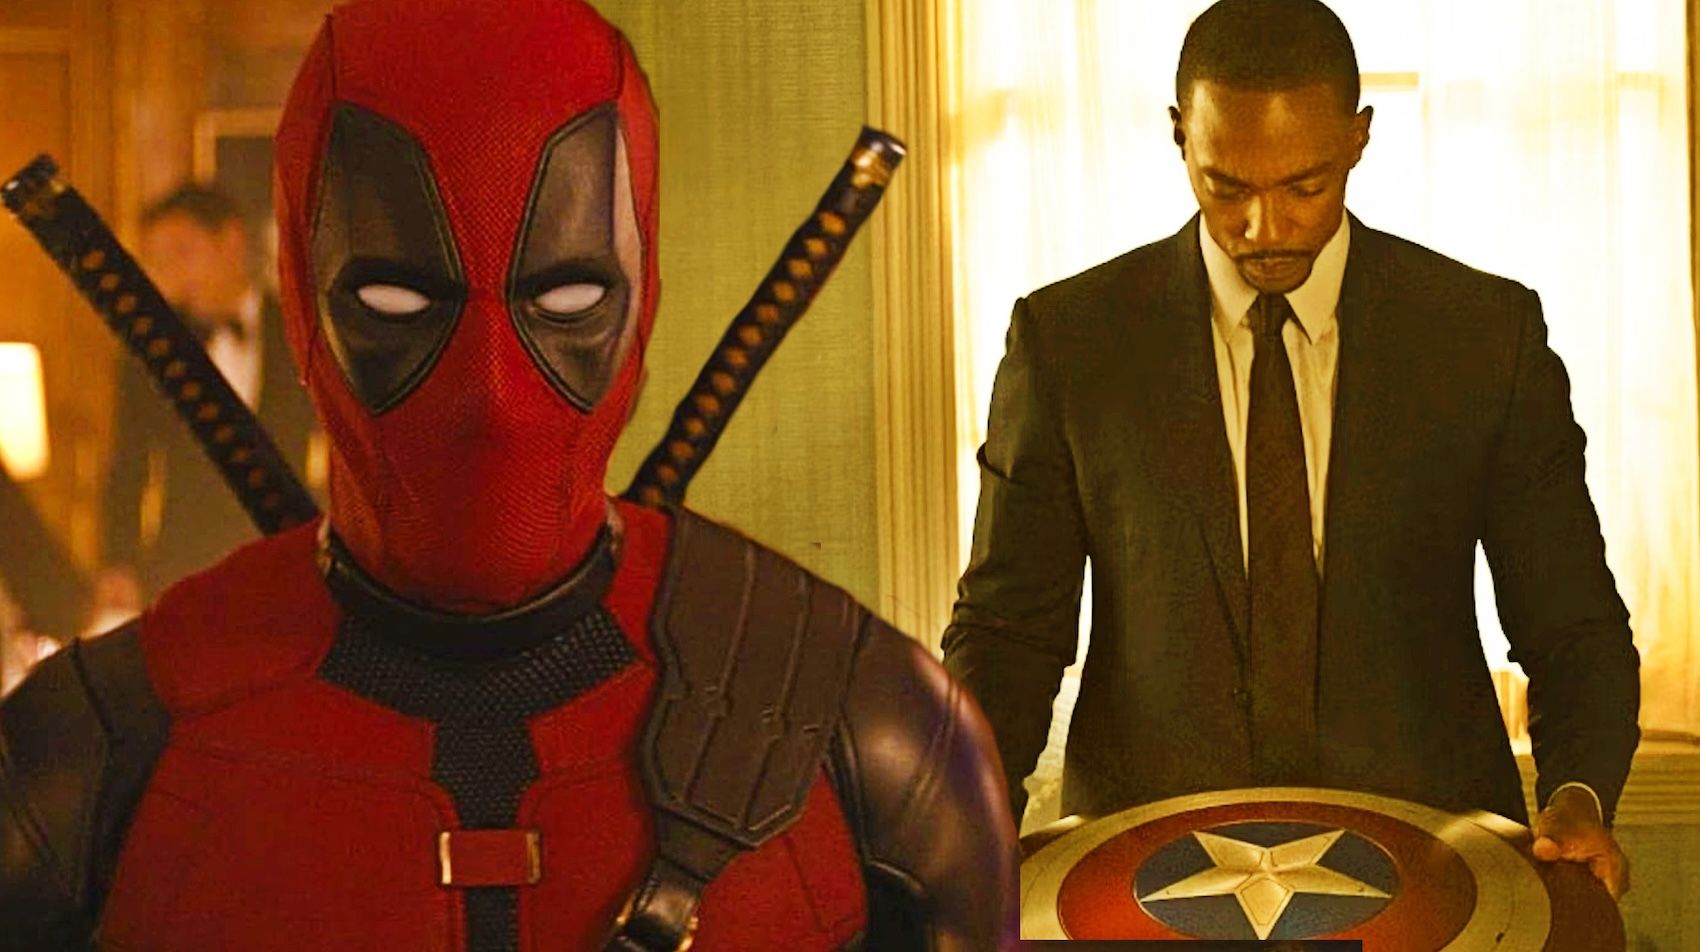 Deadpool in front of Poker game and Sam Wilson holding Captain America's shield